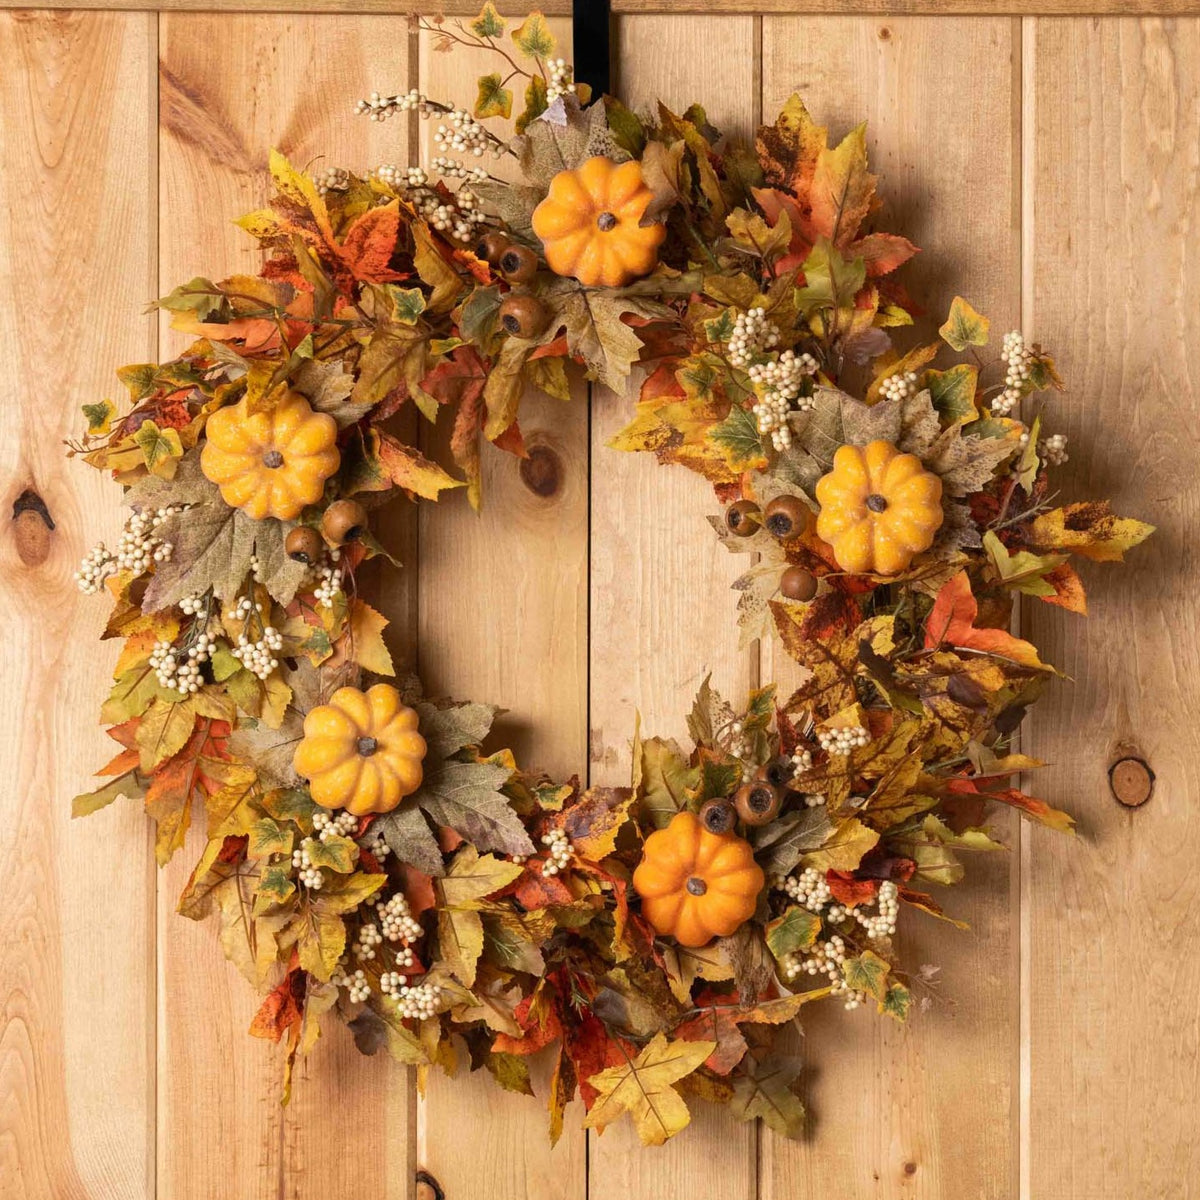 Fall Peony and Pumpkin Wreath, Autumn Year Round Wreaths for Front Door,  Artificial Fall Wreath, Maple Leaf Berry Pumpkin Pinecone Harvest Wreath  (40